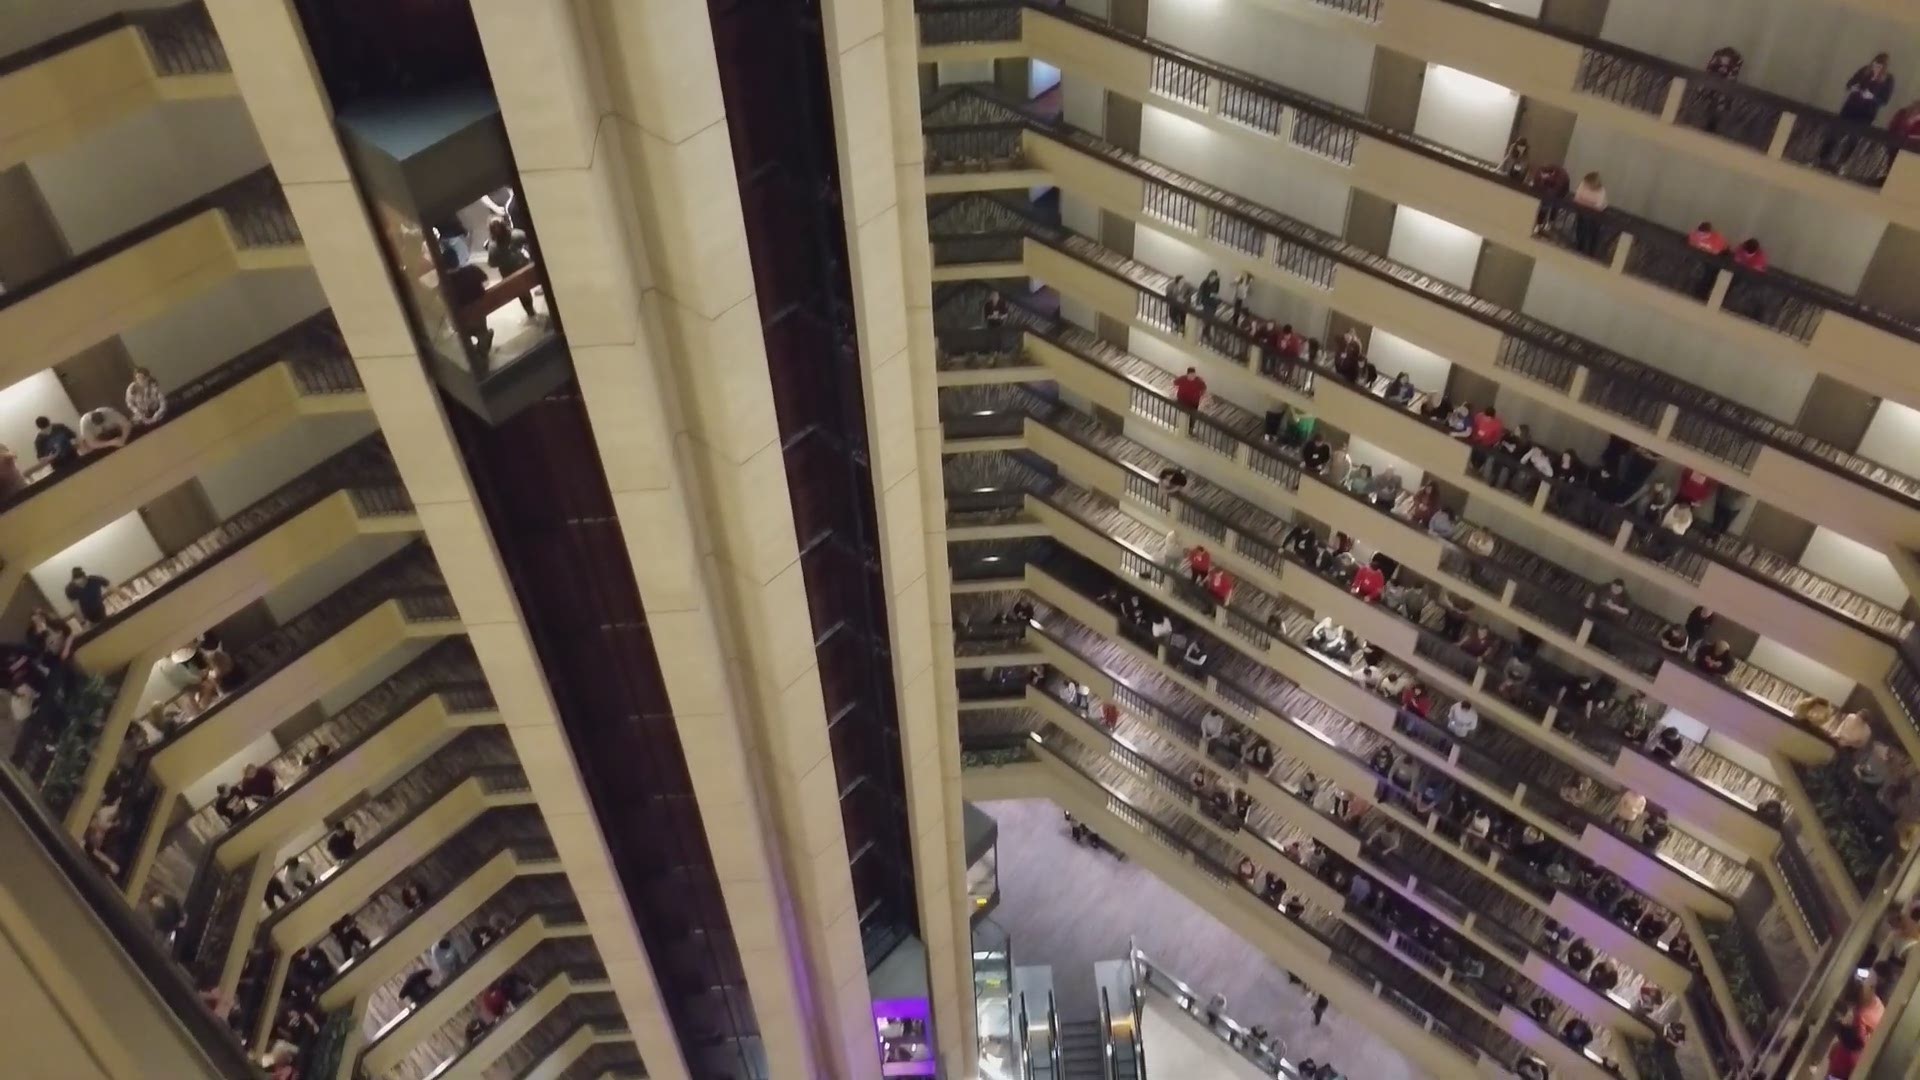 The tradition always happens at Louisville's Hyatt Regency during the choir conference. (video via Ben Vivano/YouTube)